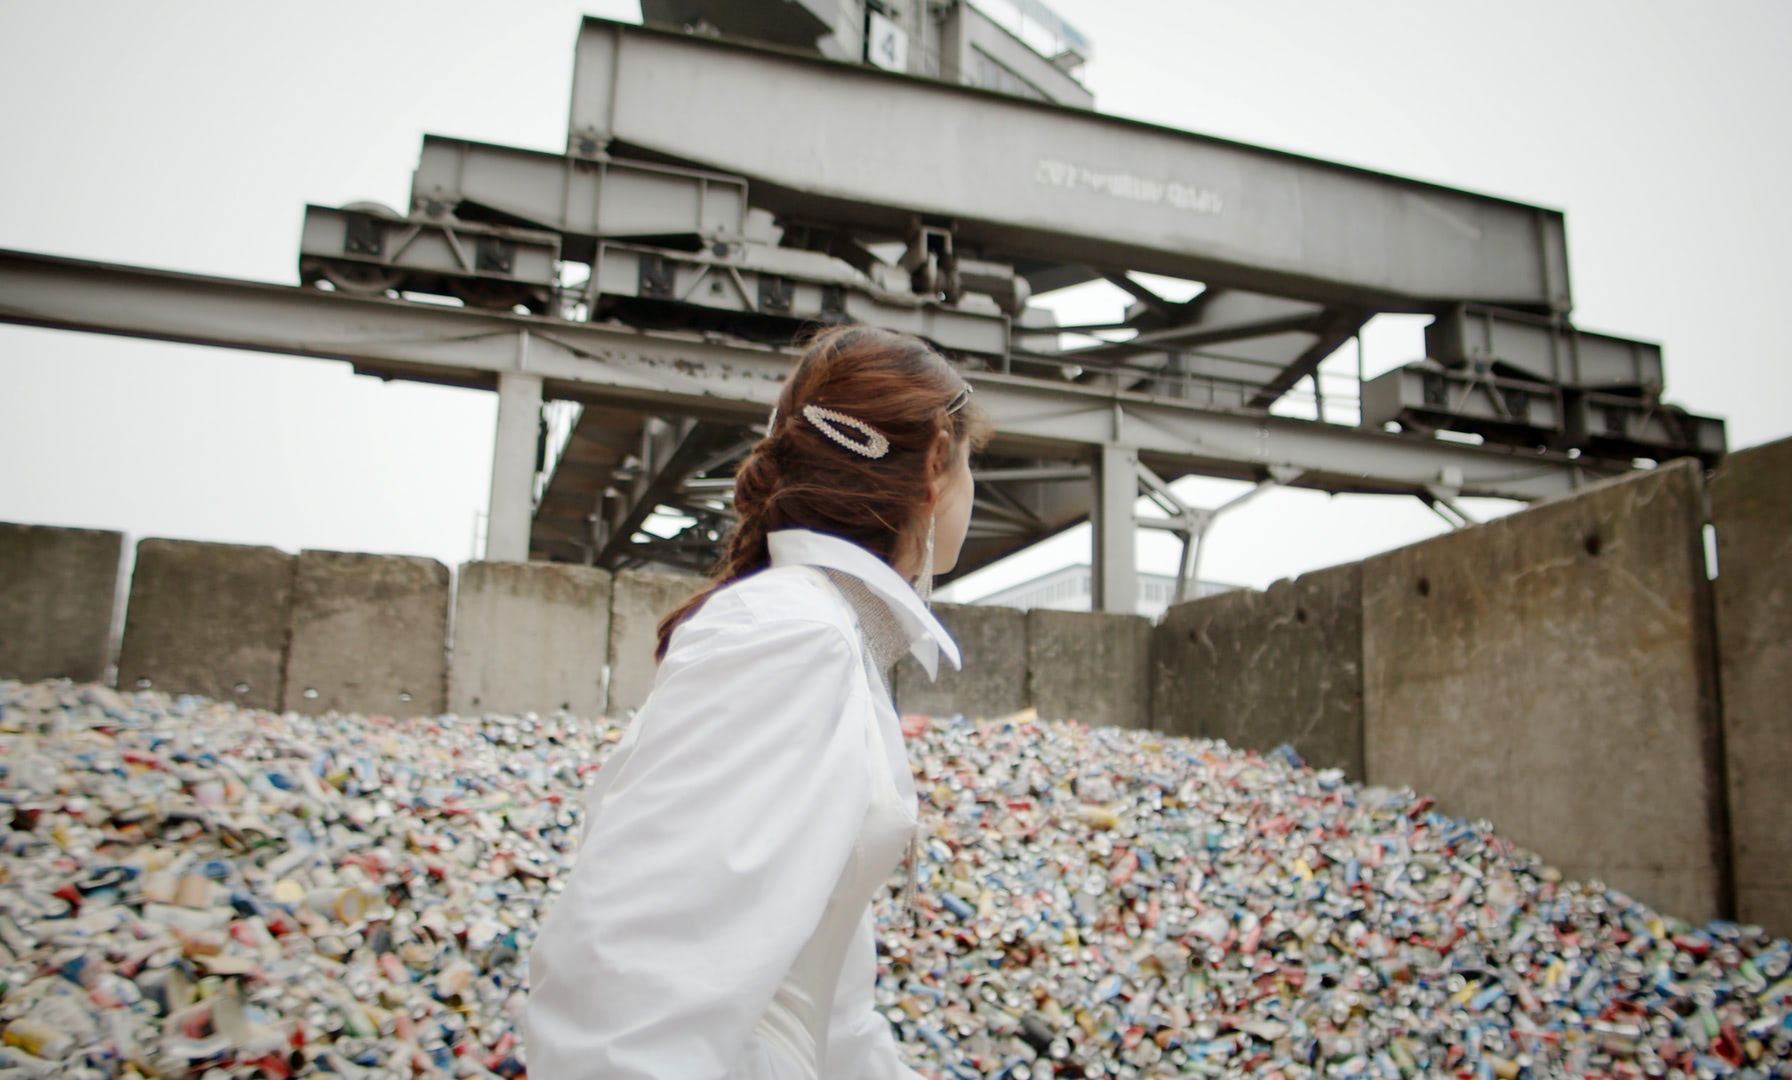 A young woman is standing in a recycling yard in front of a mountain of old discarded beer cans.